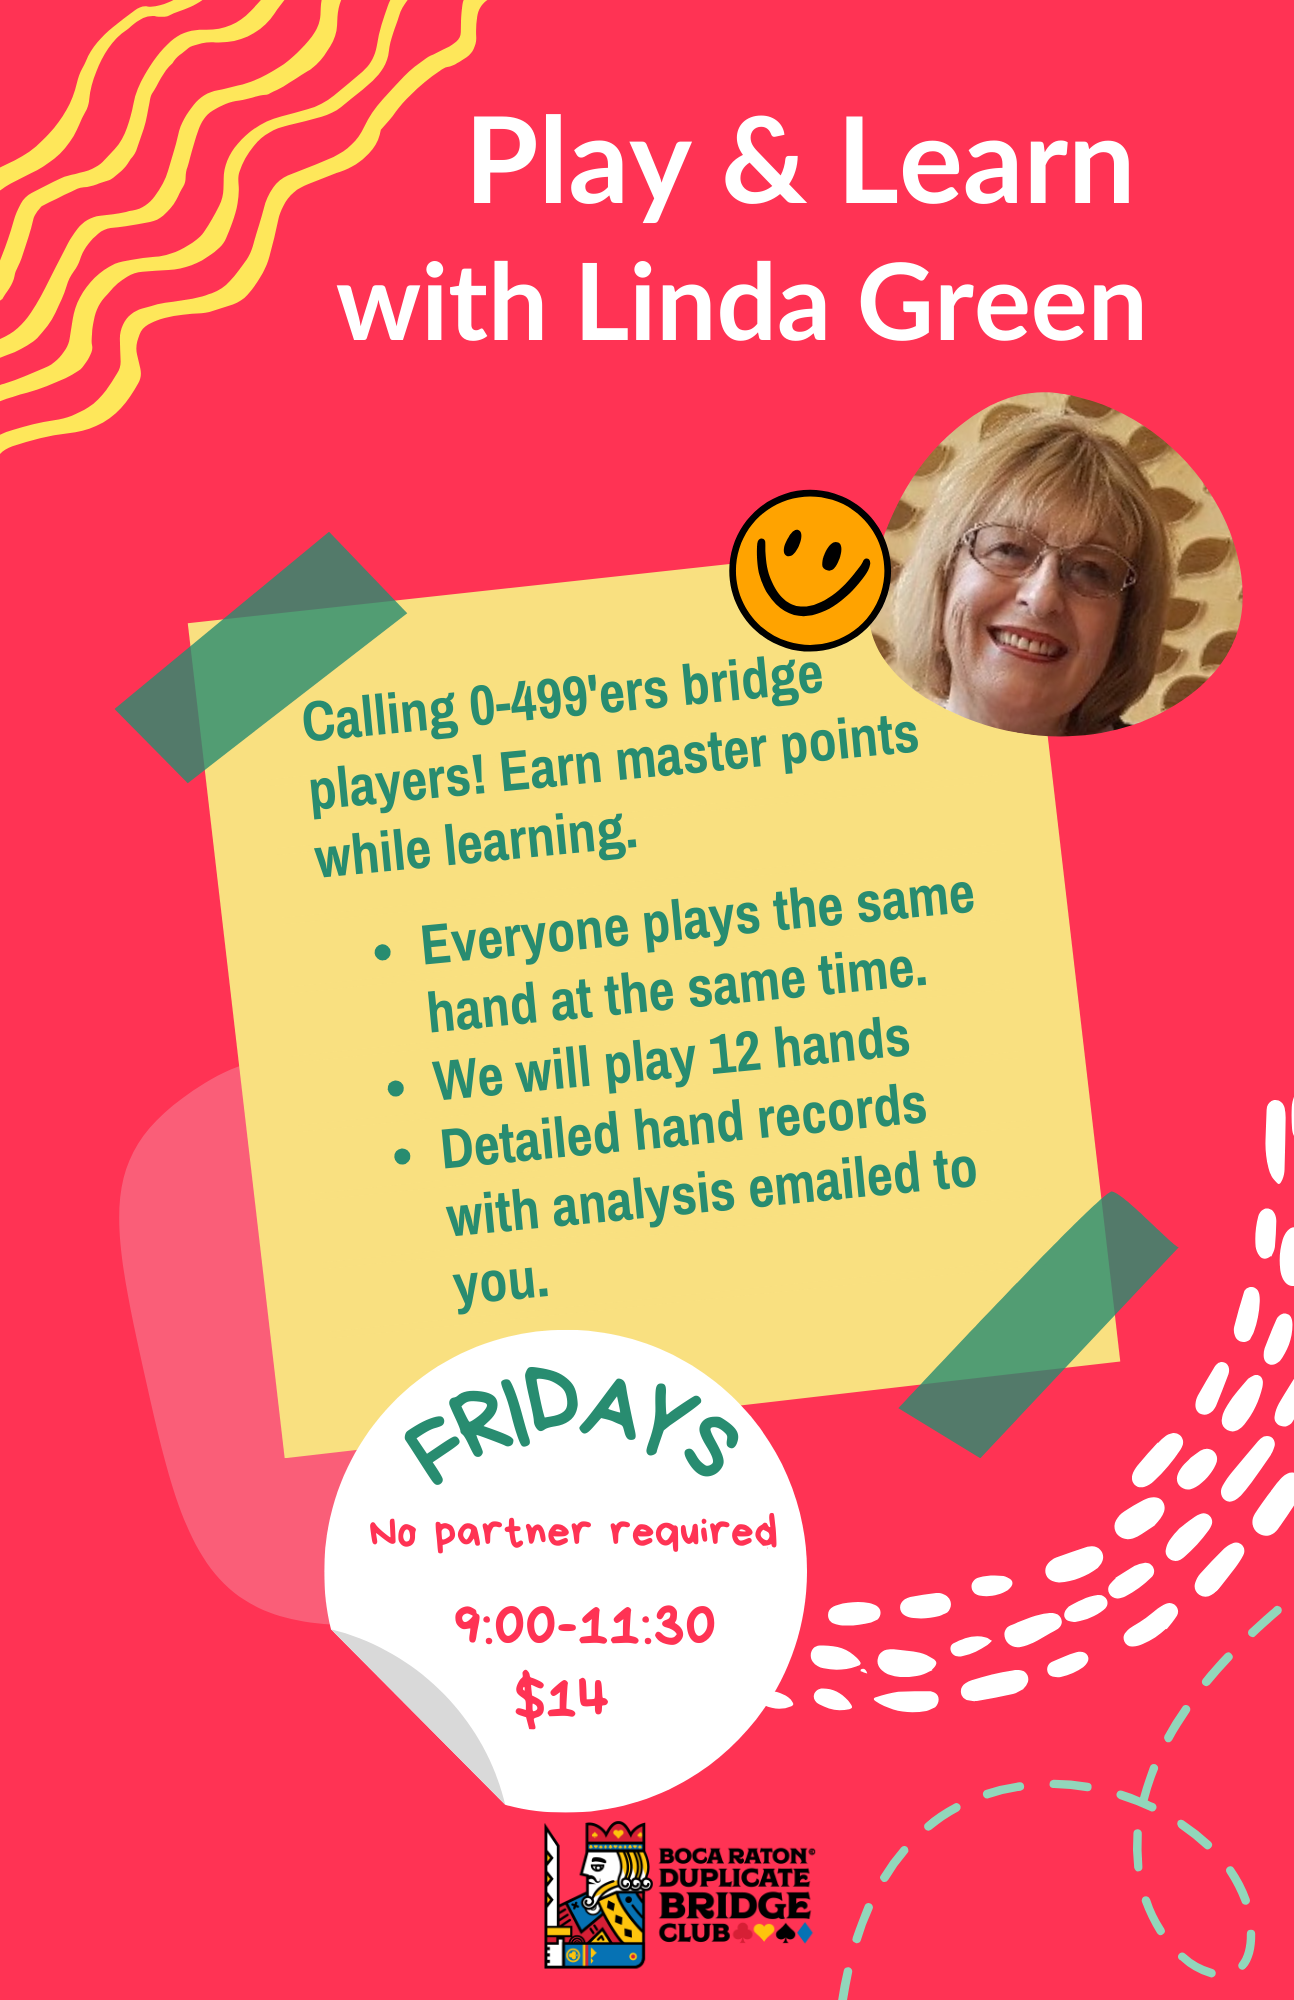 Play and Learn with Linda Green